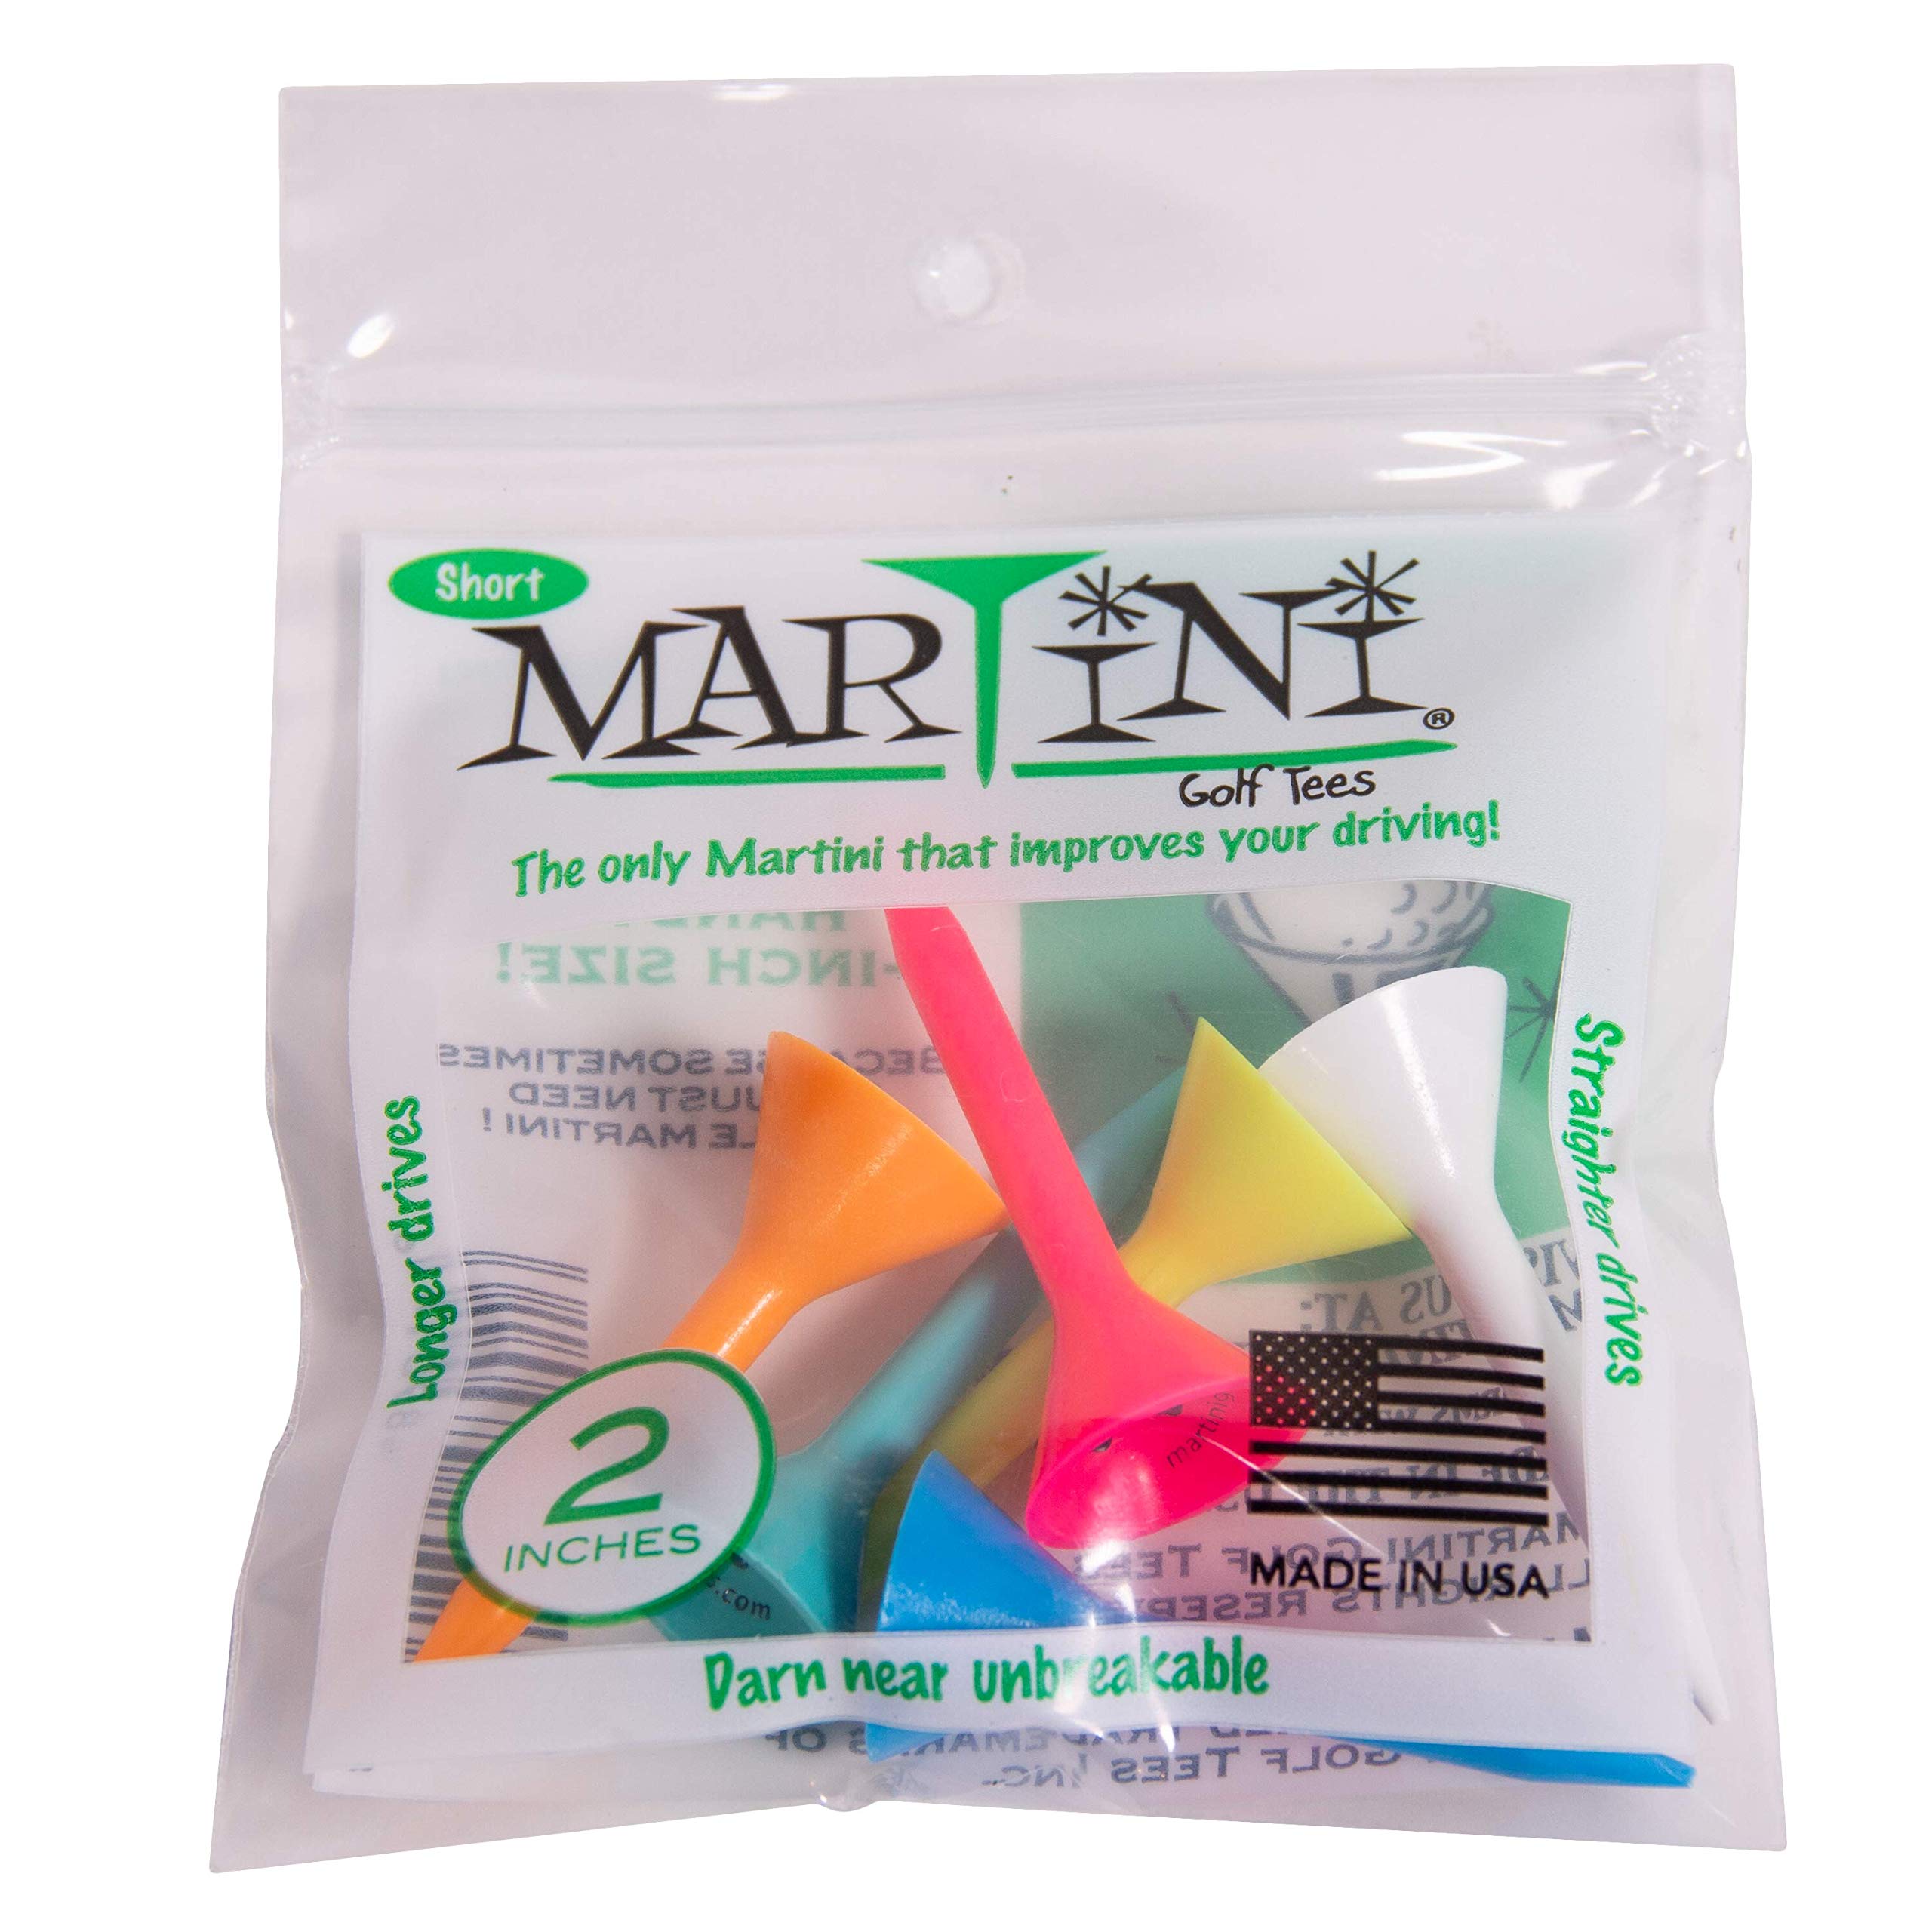 Martini Golf Tees 2" Durable Plastic Tees (5 Pack), Assorted Colors $4.99 Amazon